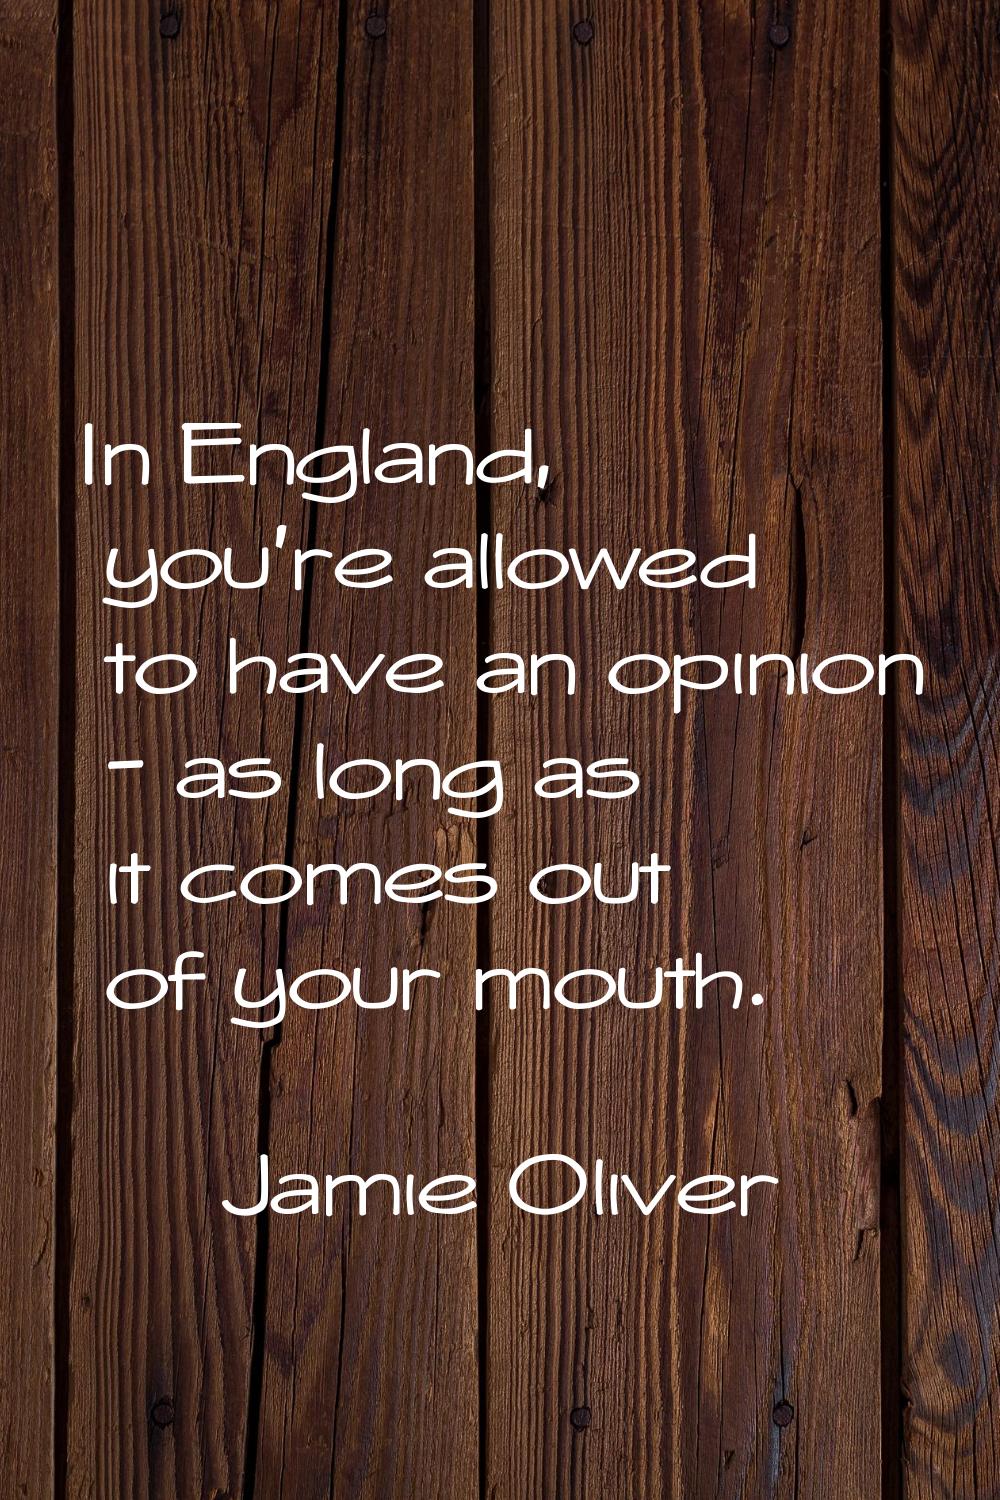 In England, you're allowed to have an opinion - as long as it comes out of your mouth.